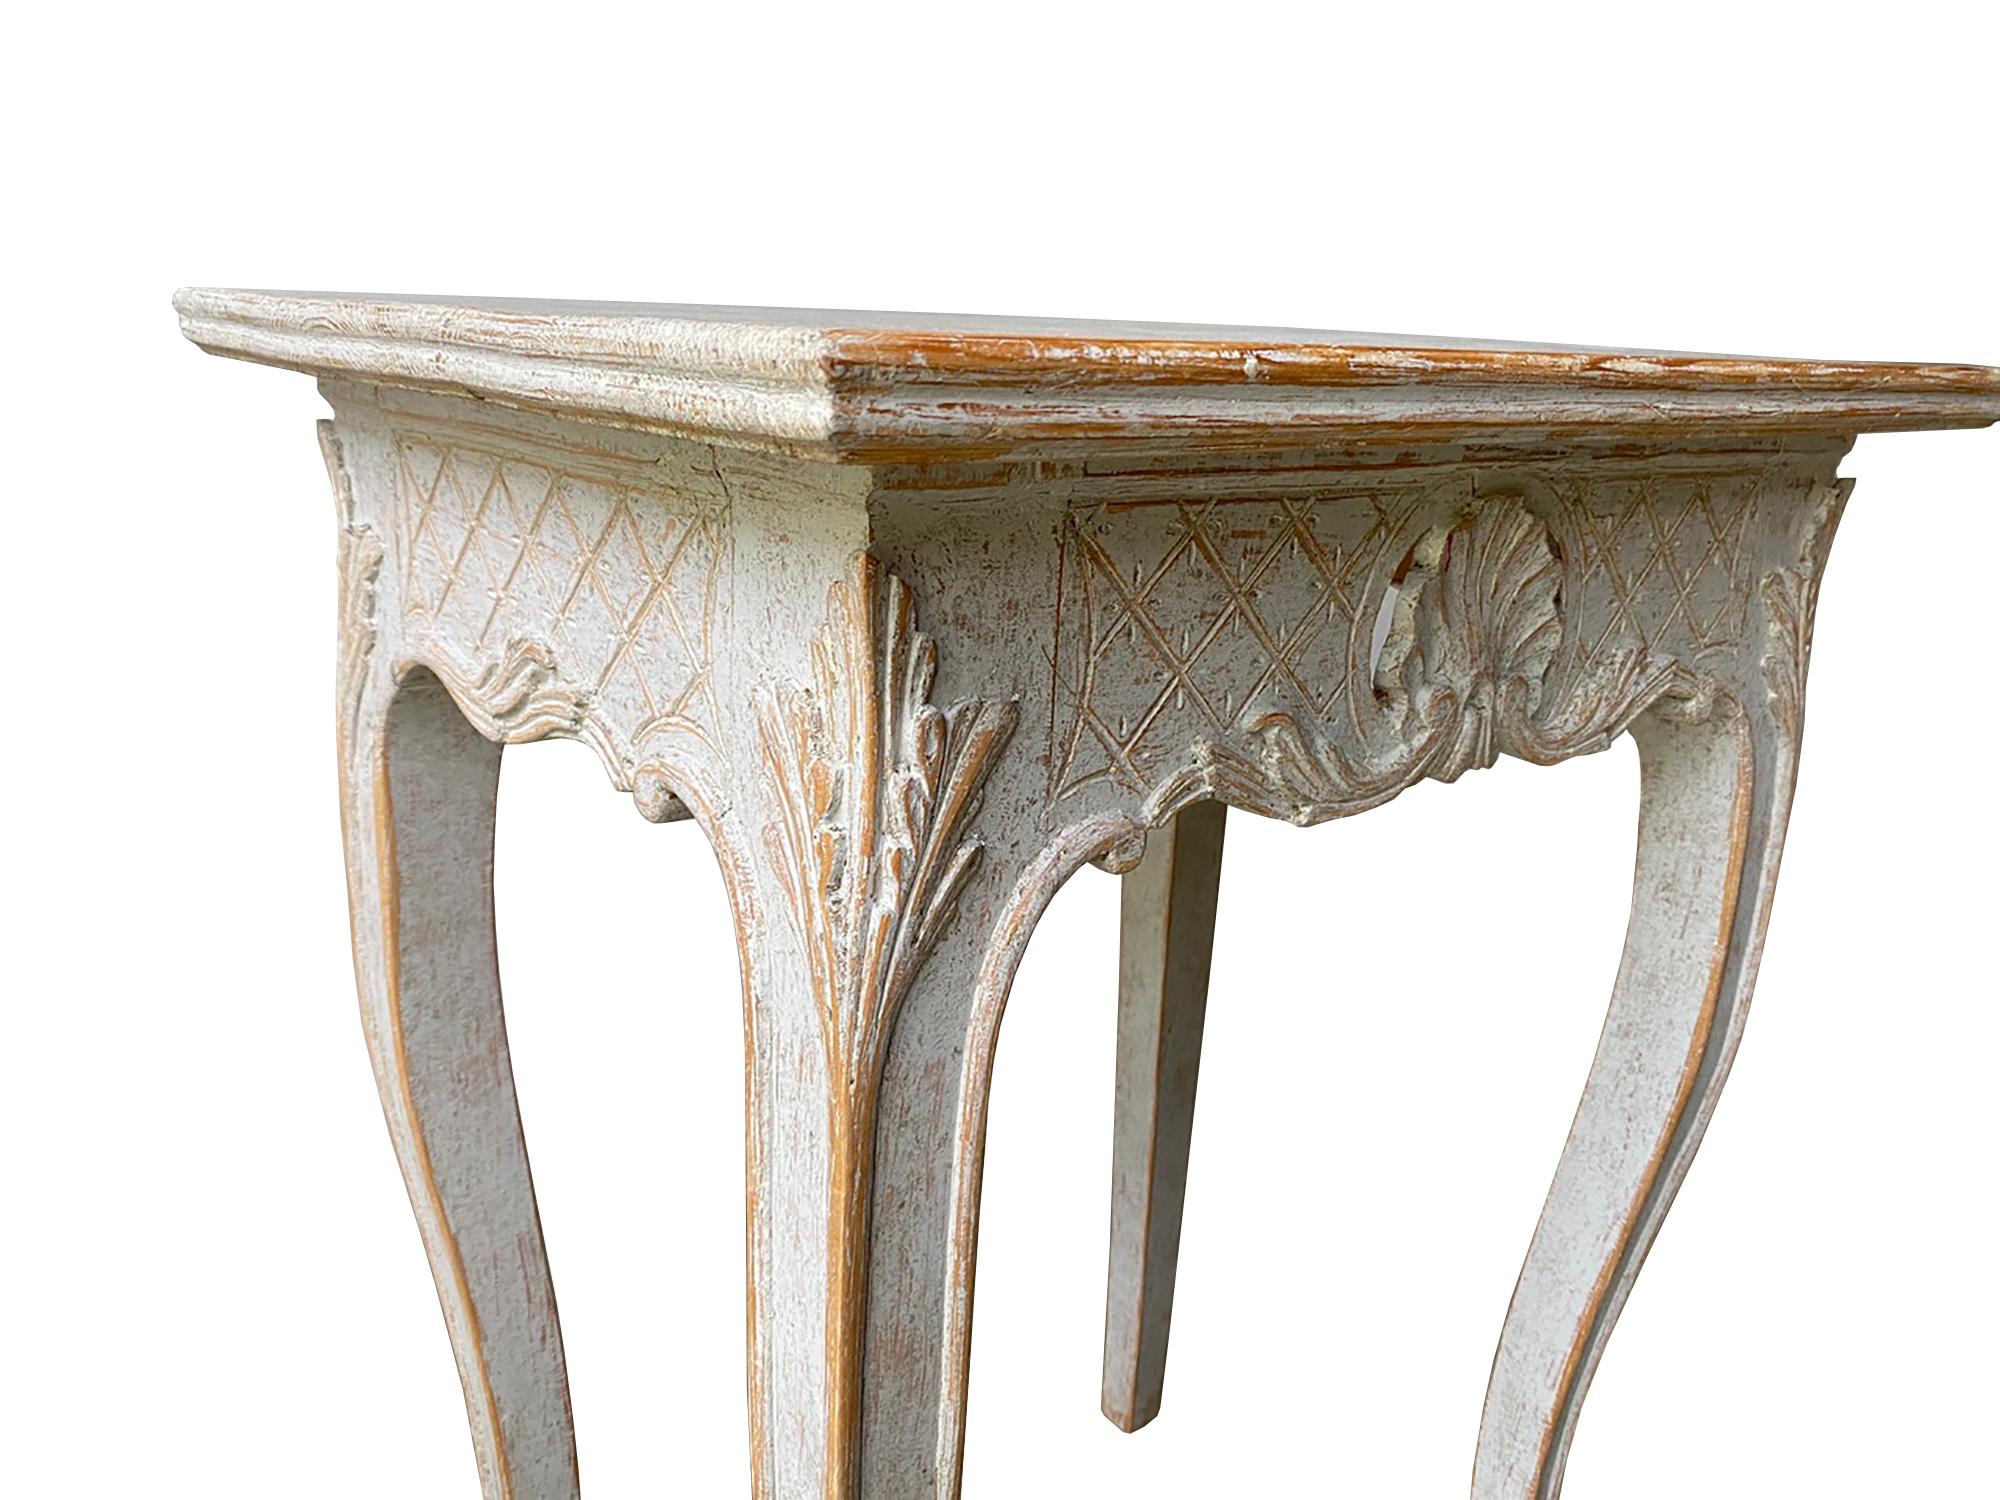 This decorative pair of 19th century tables feature a carved decorative freeze with diamond and shell design, and cabriolet legs with acanthus leaf decoration.